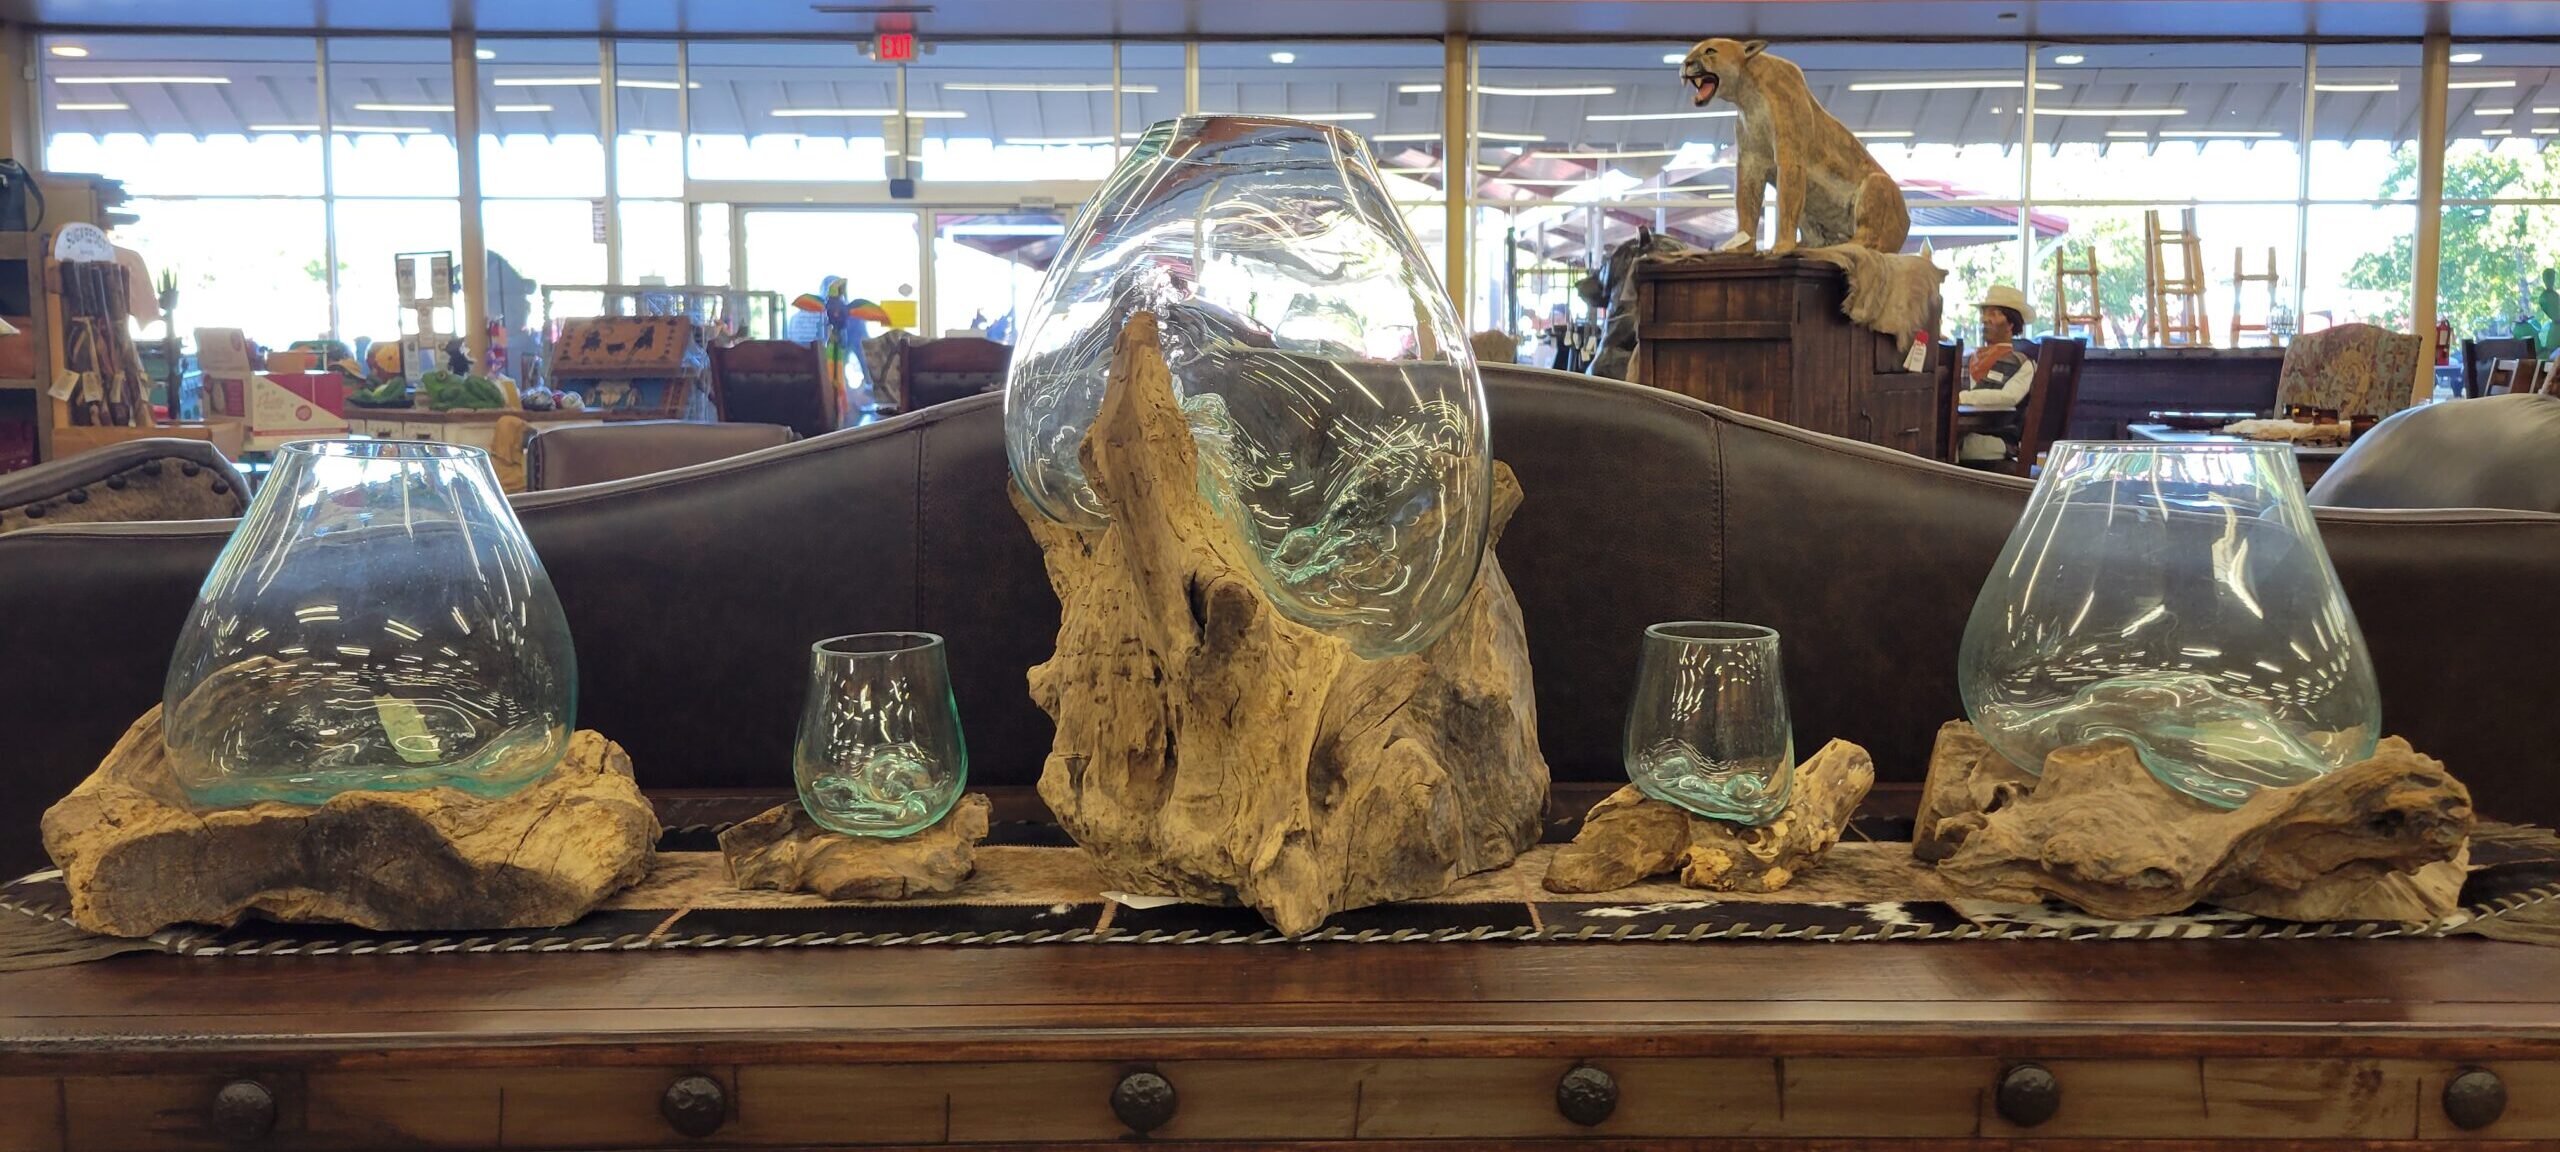 Driftwood with blown glass bowls in various sizes.